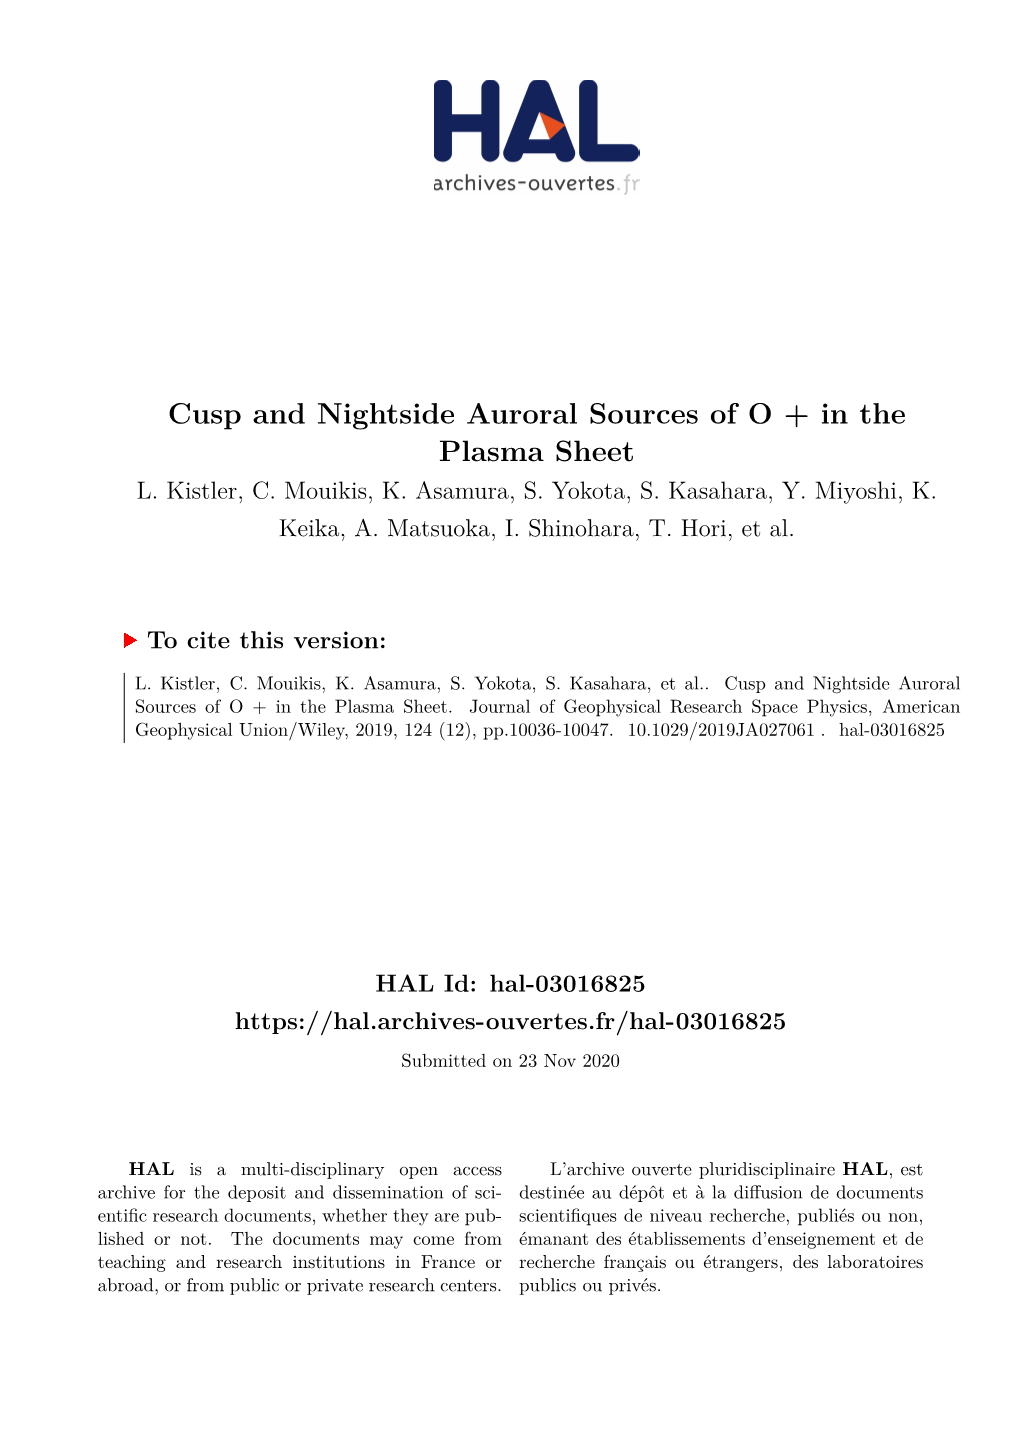 Cusp and Nightside Auroral Sources of O + in the Plasma Sheet L